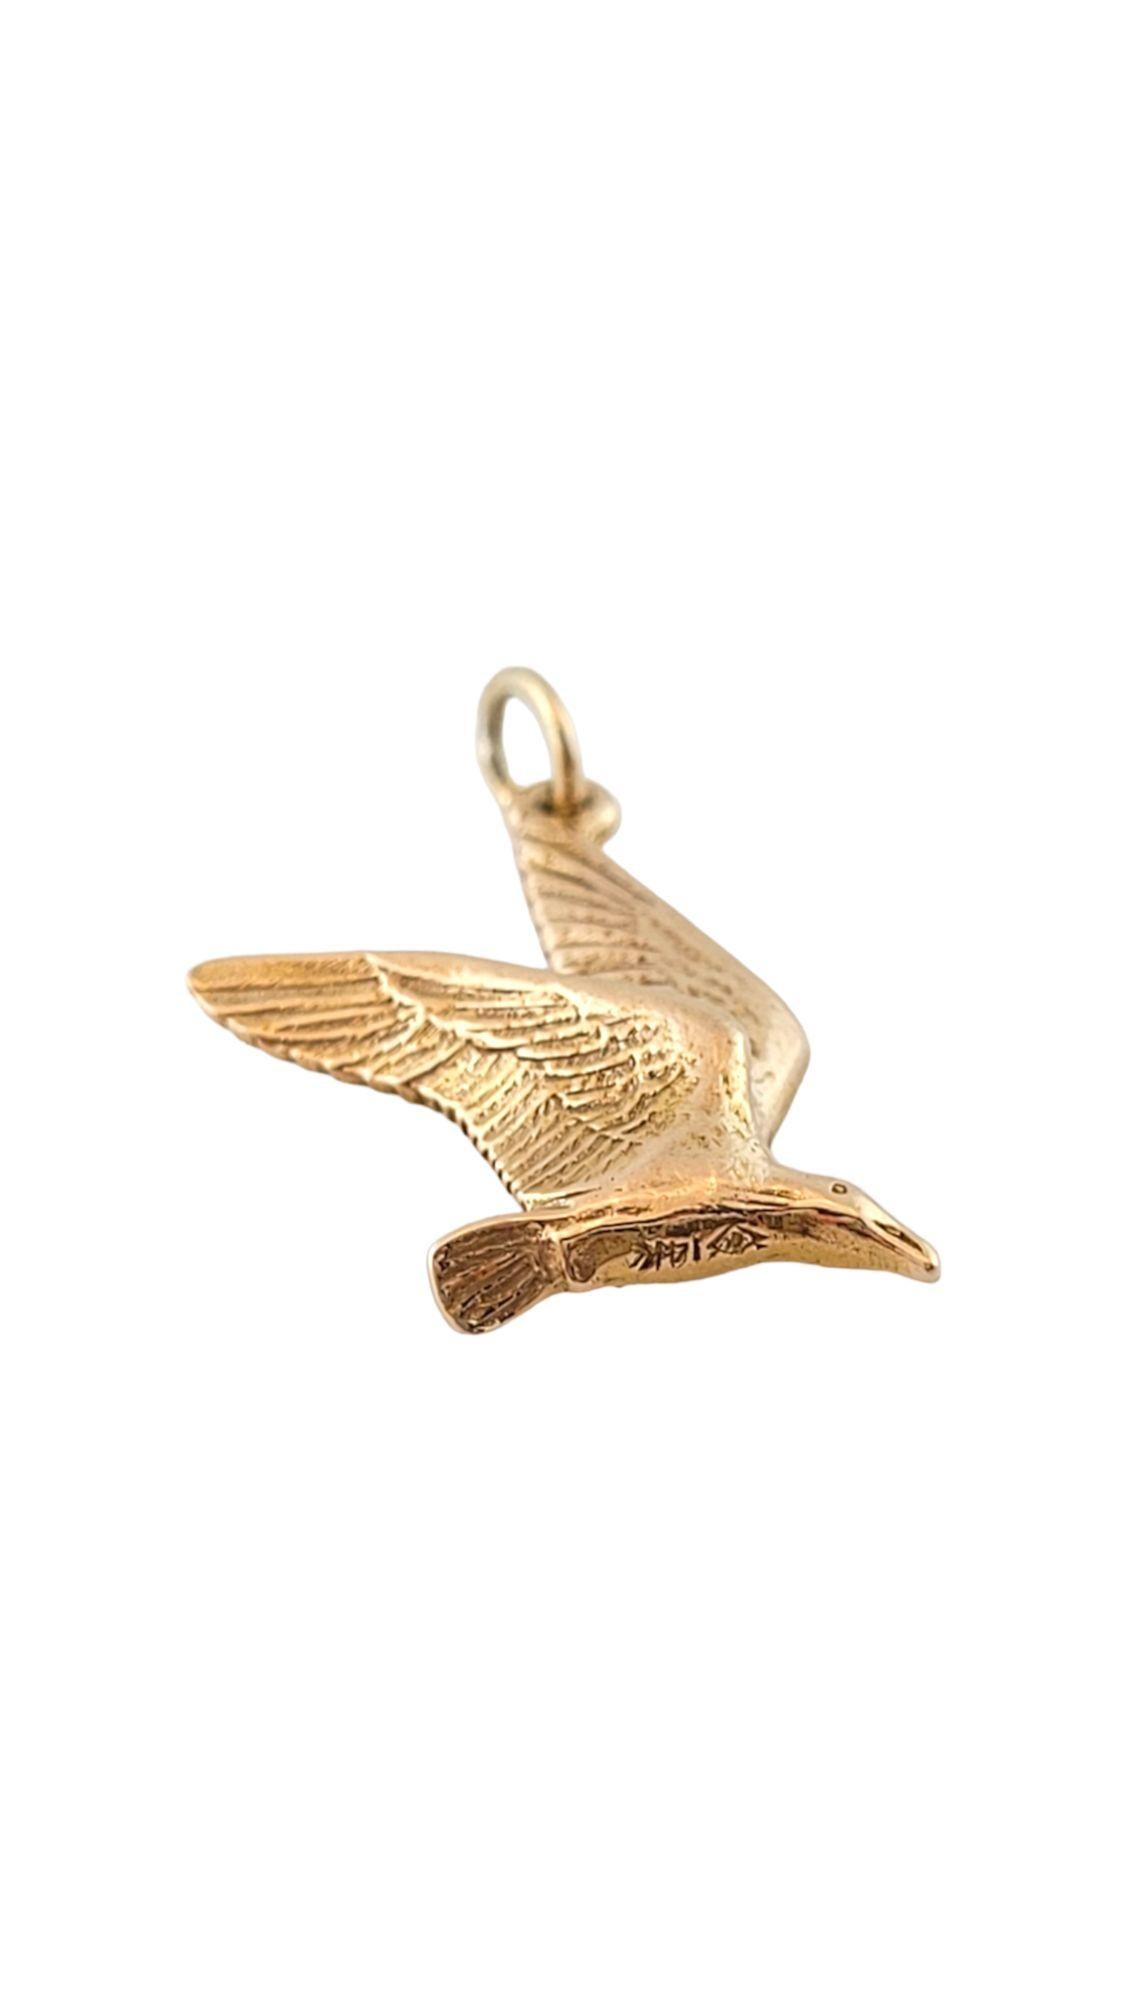 Vintage 14K Yellow Gold Bird Charm

This elegant bird charm features meticulously detailed wings in 14k yellow gold.

Size: 13.6 mm X 23.2 mm

Weight: 3.0 g/ 1.9 dwt

Hallmark: 14K

Very good condition, professionally polished.

Will come packaged